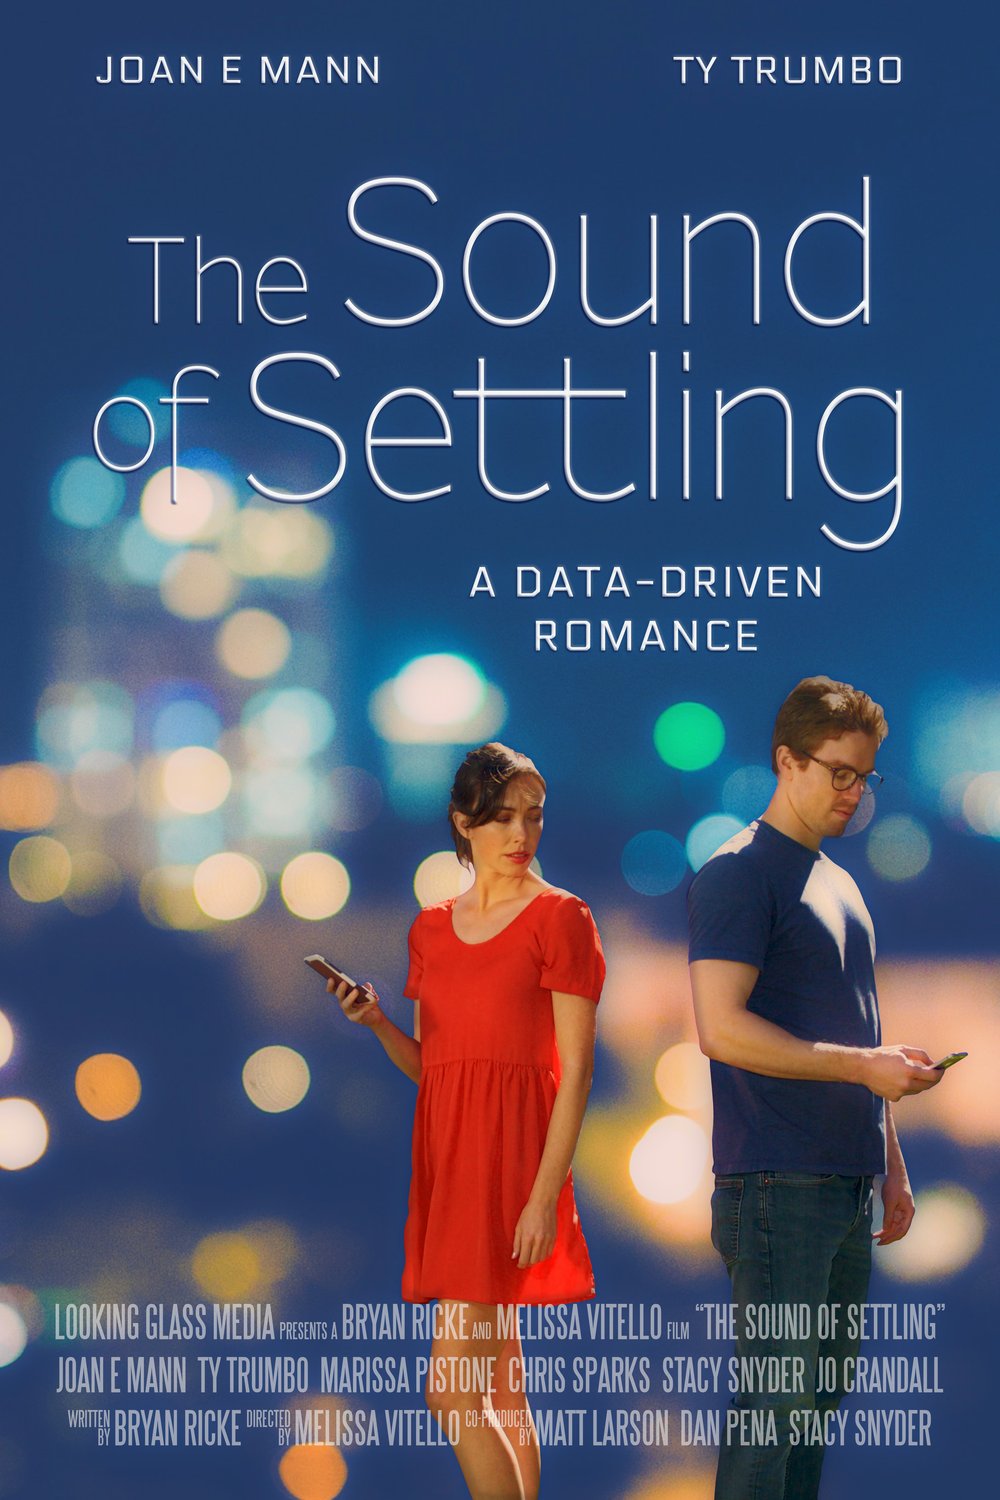 Poster of the movie The Sound of Settling